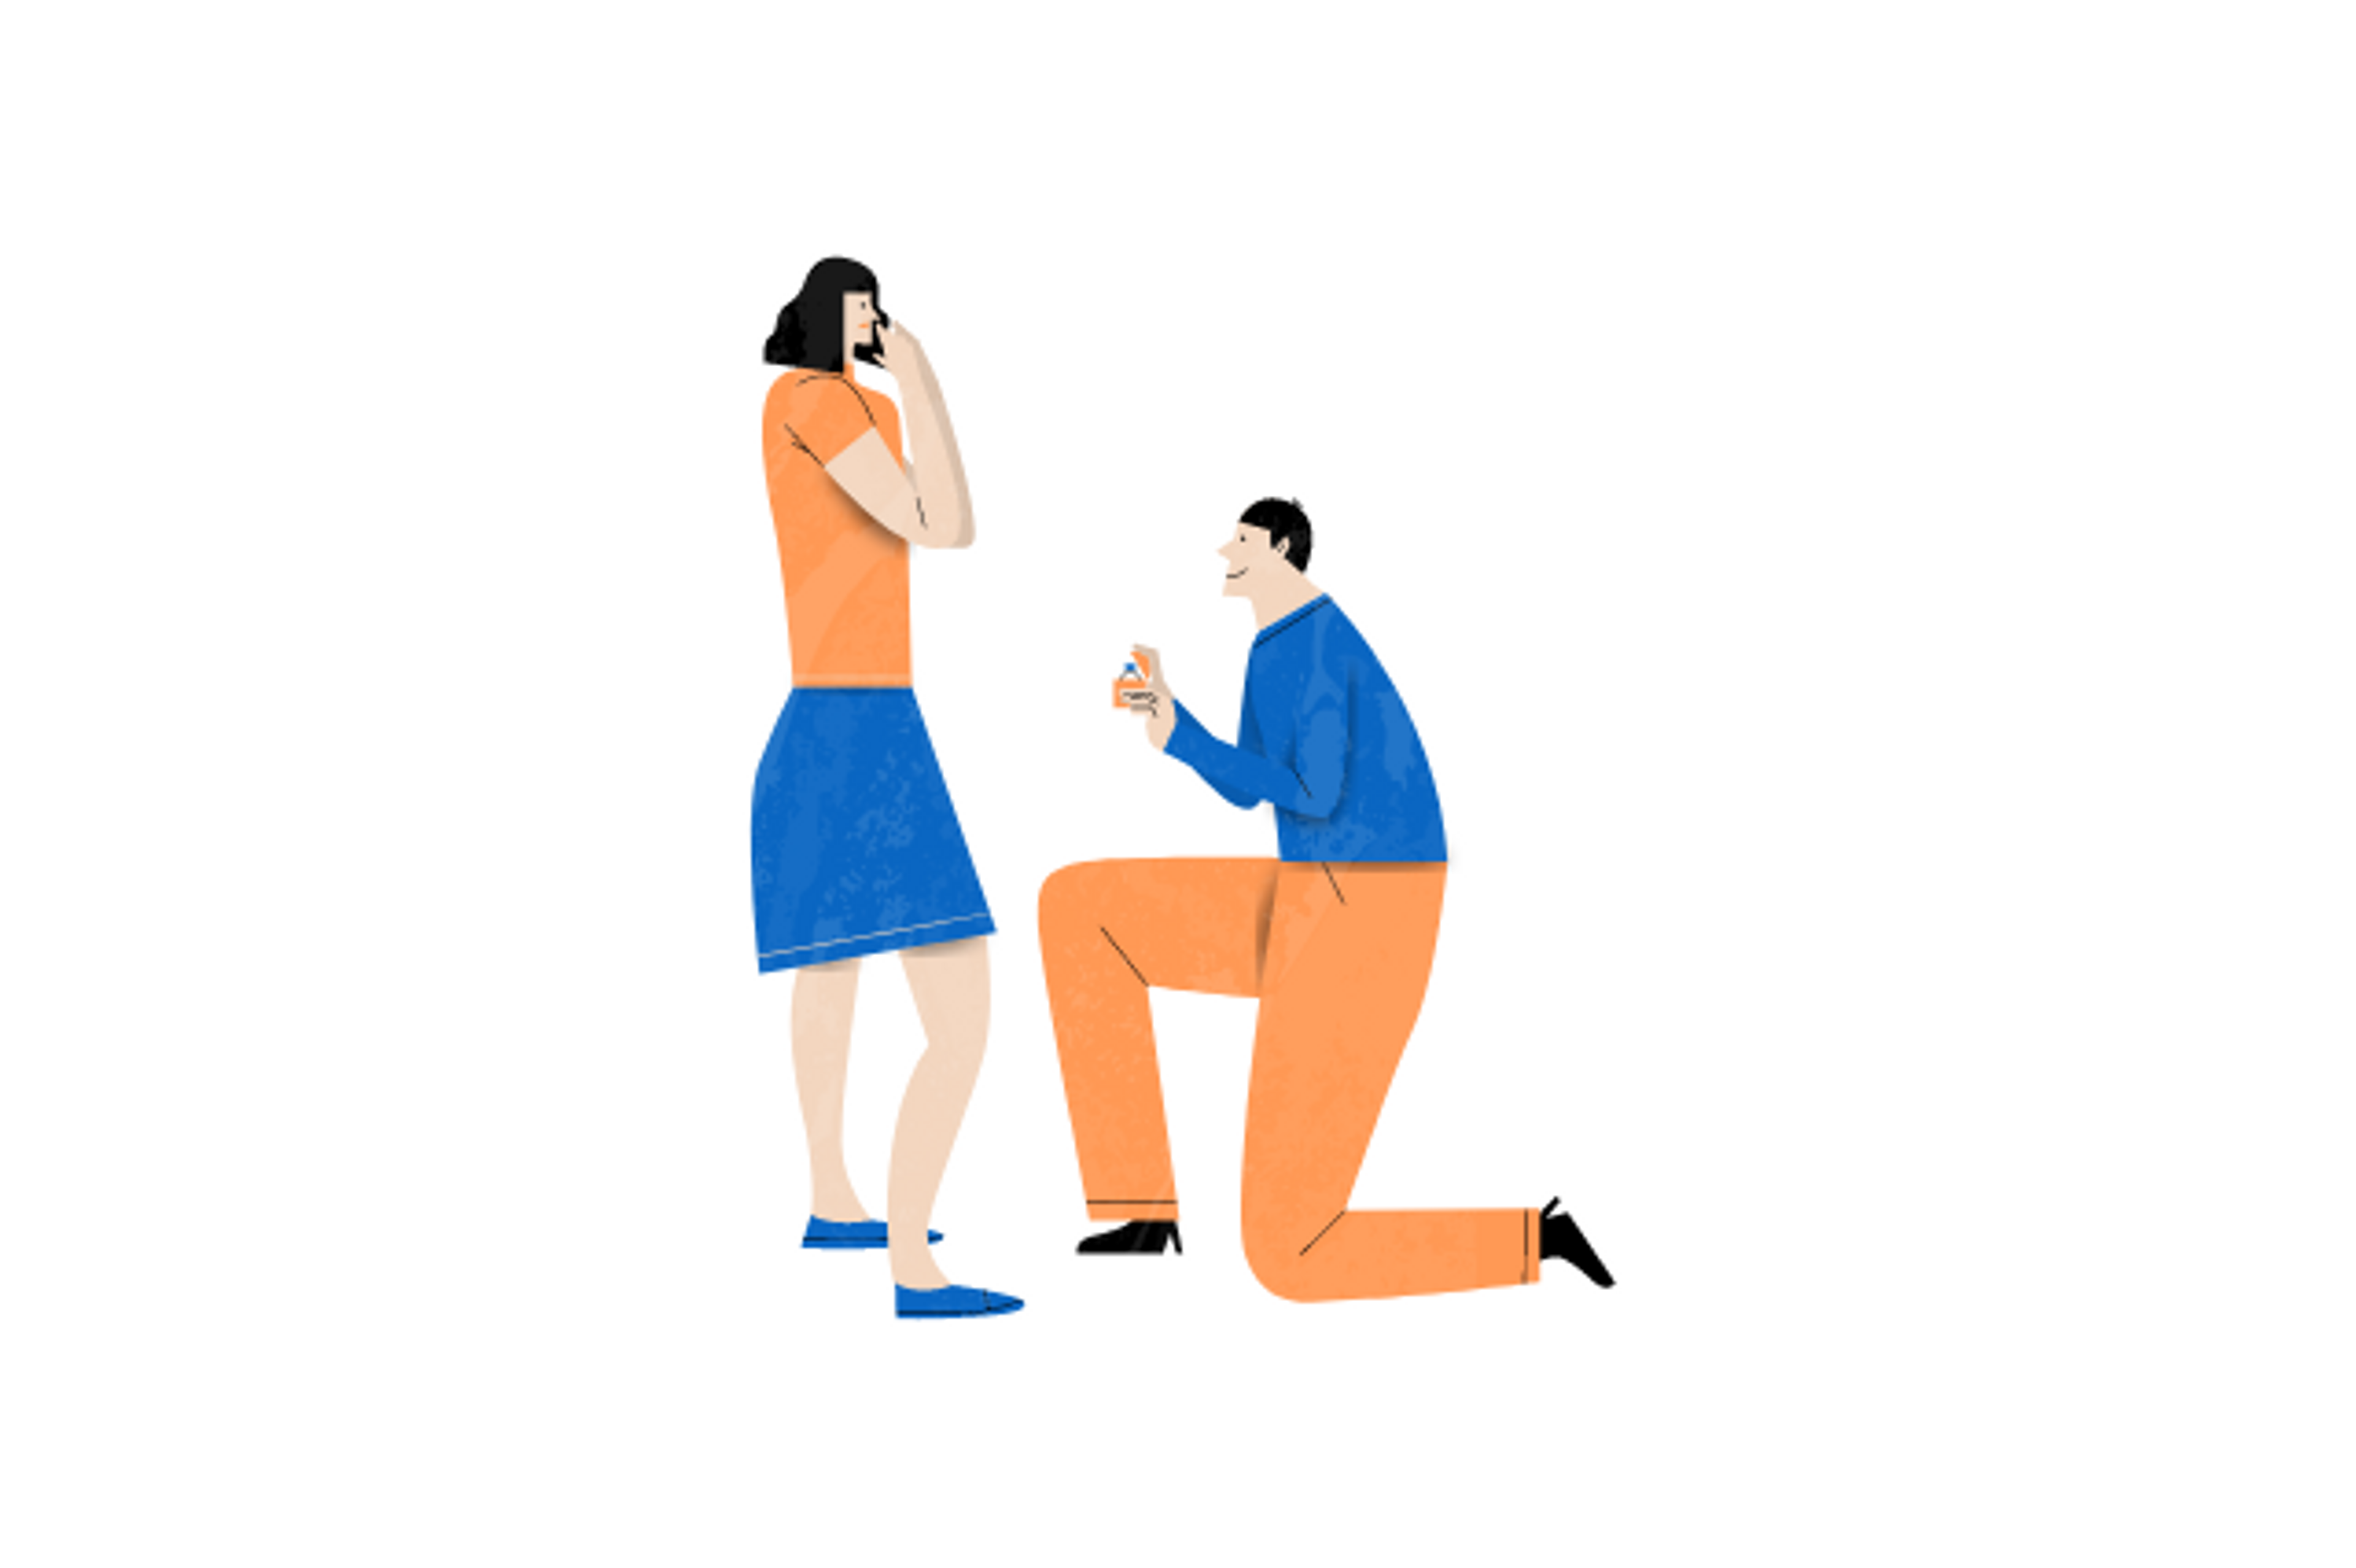 graphic of a person proposing